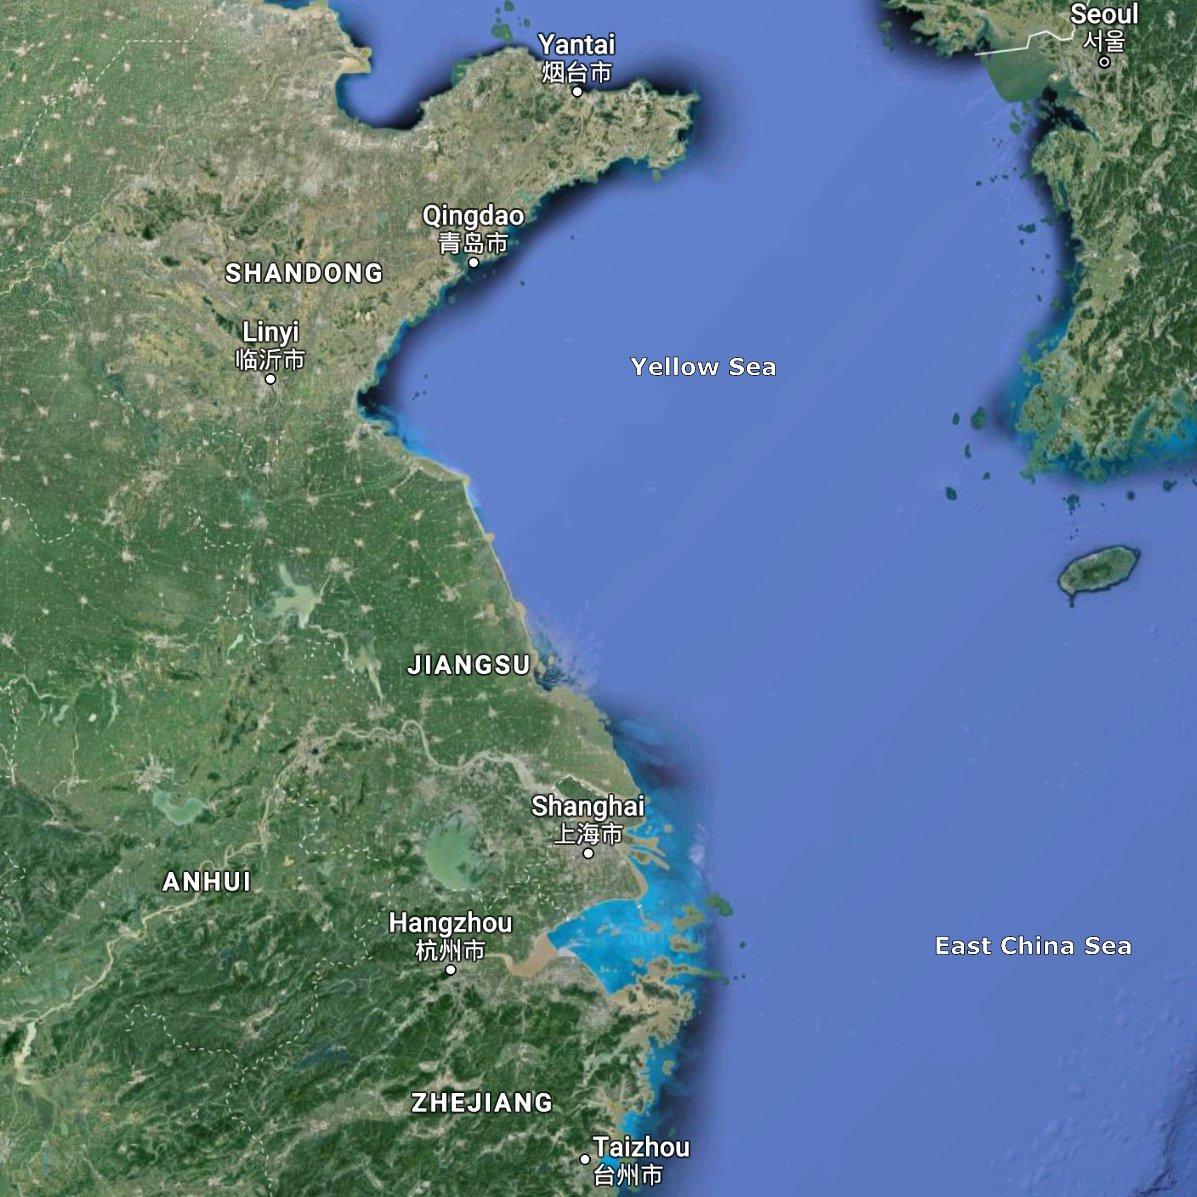 Algal blooms are common in the Yellow Sea and off the Yangtze estuary in the East China Sea (Image: Google Earth)